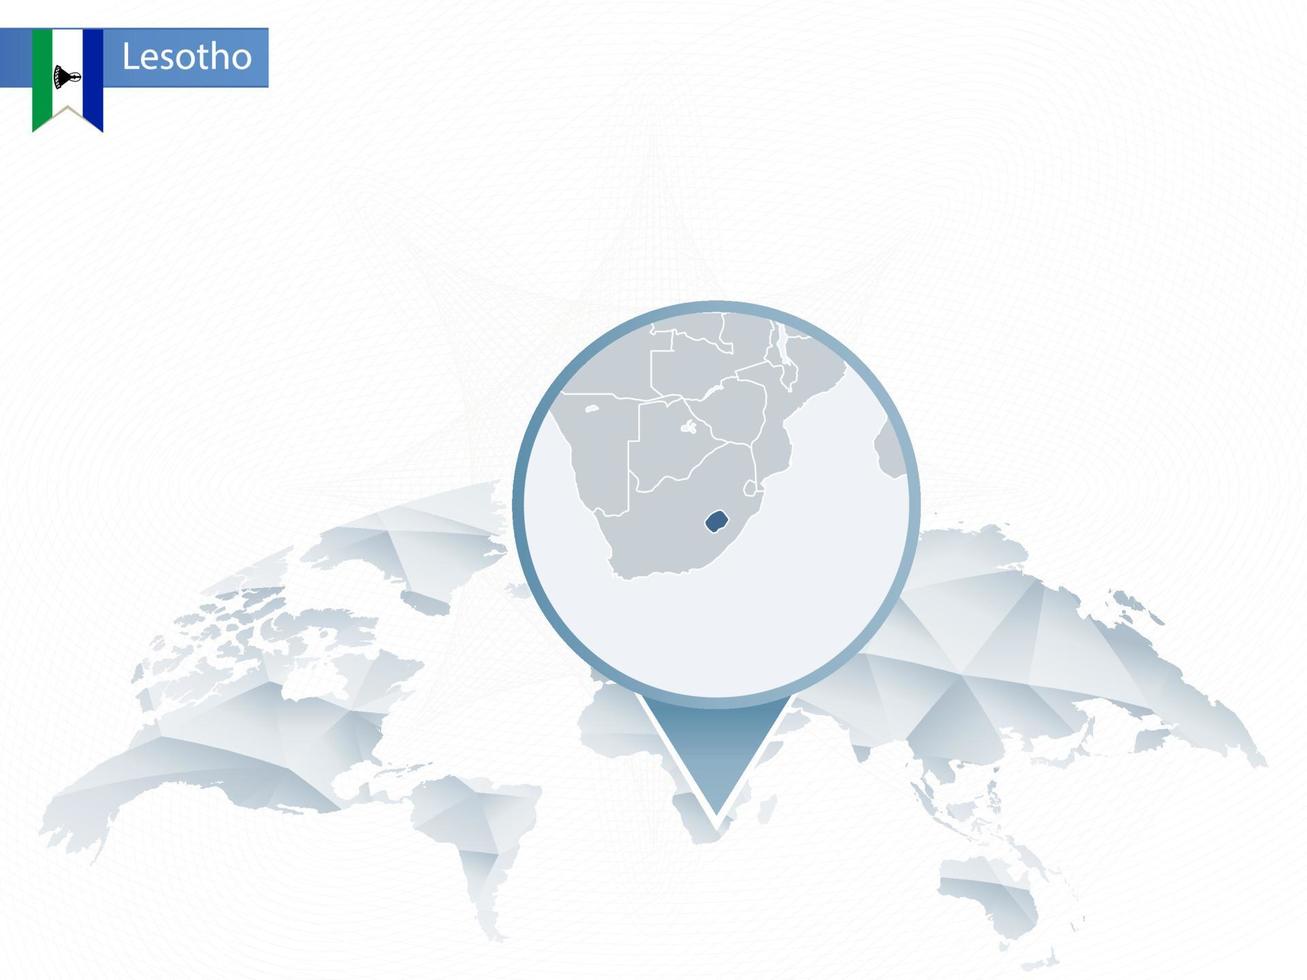 Abstract rounded World Map with pinned detailed Lesotho map. vector